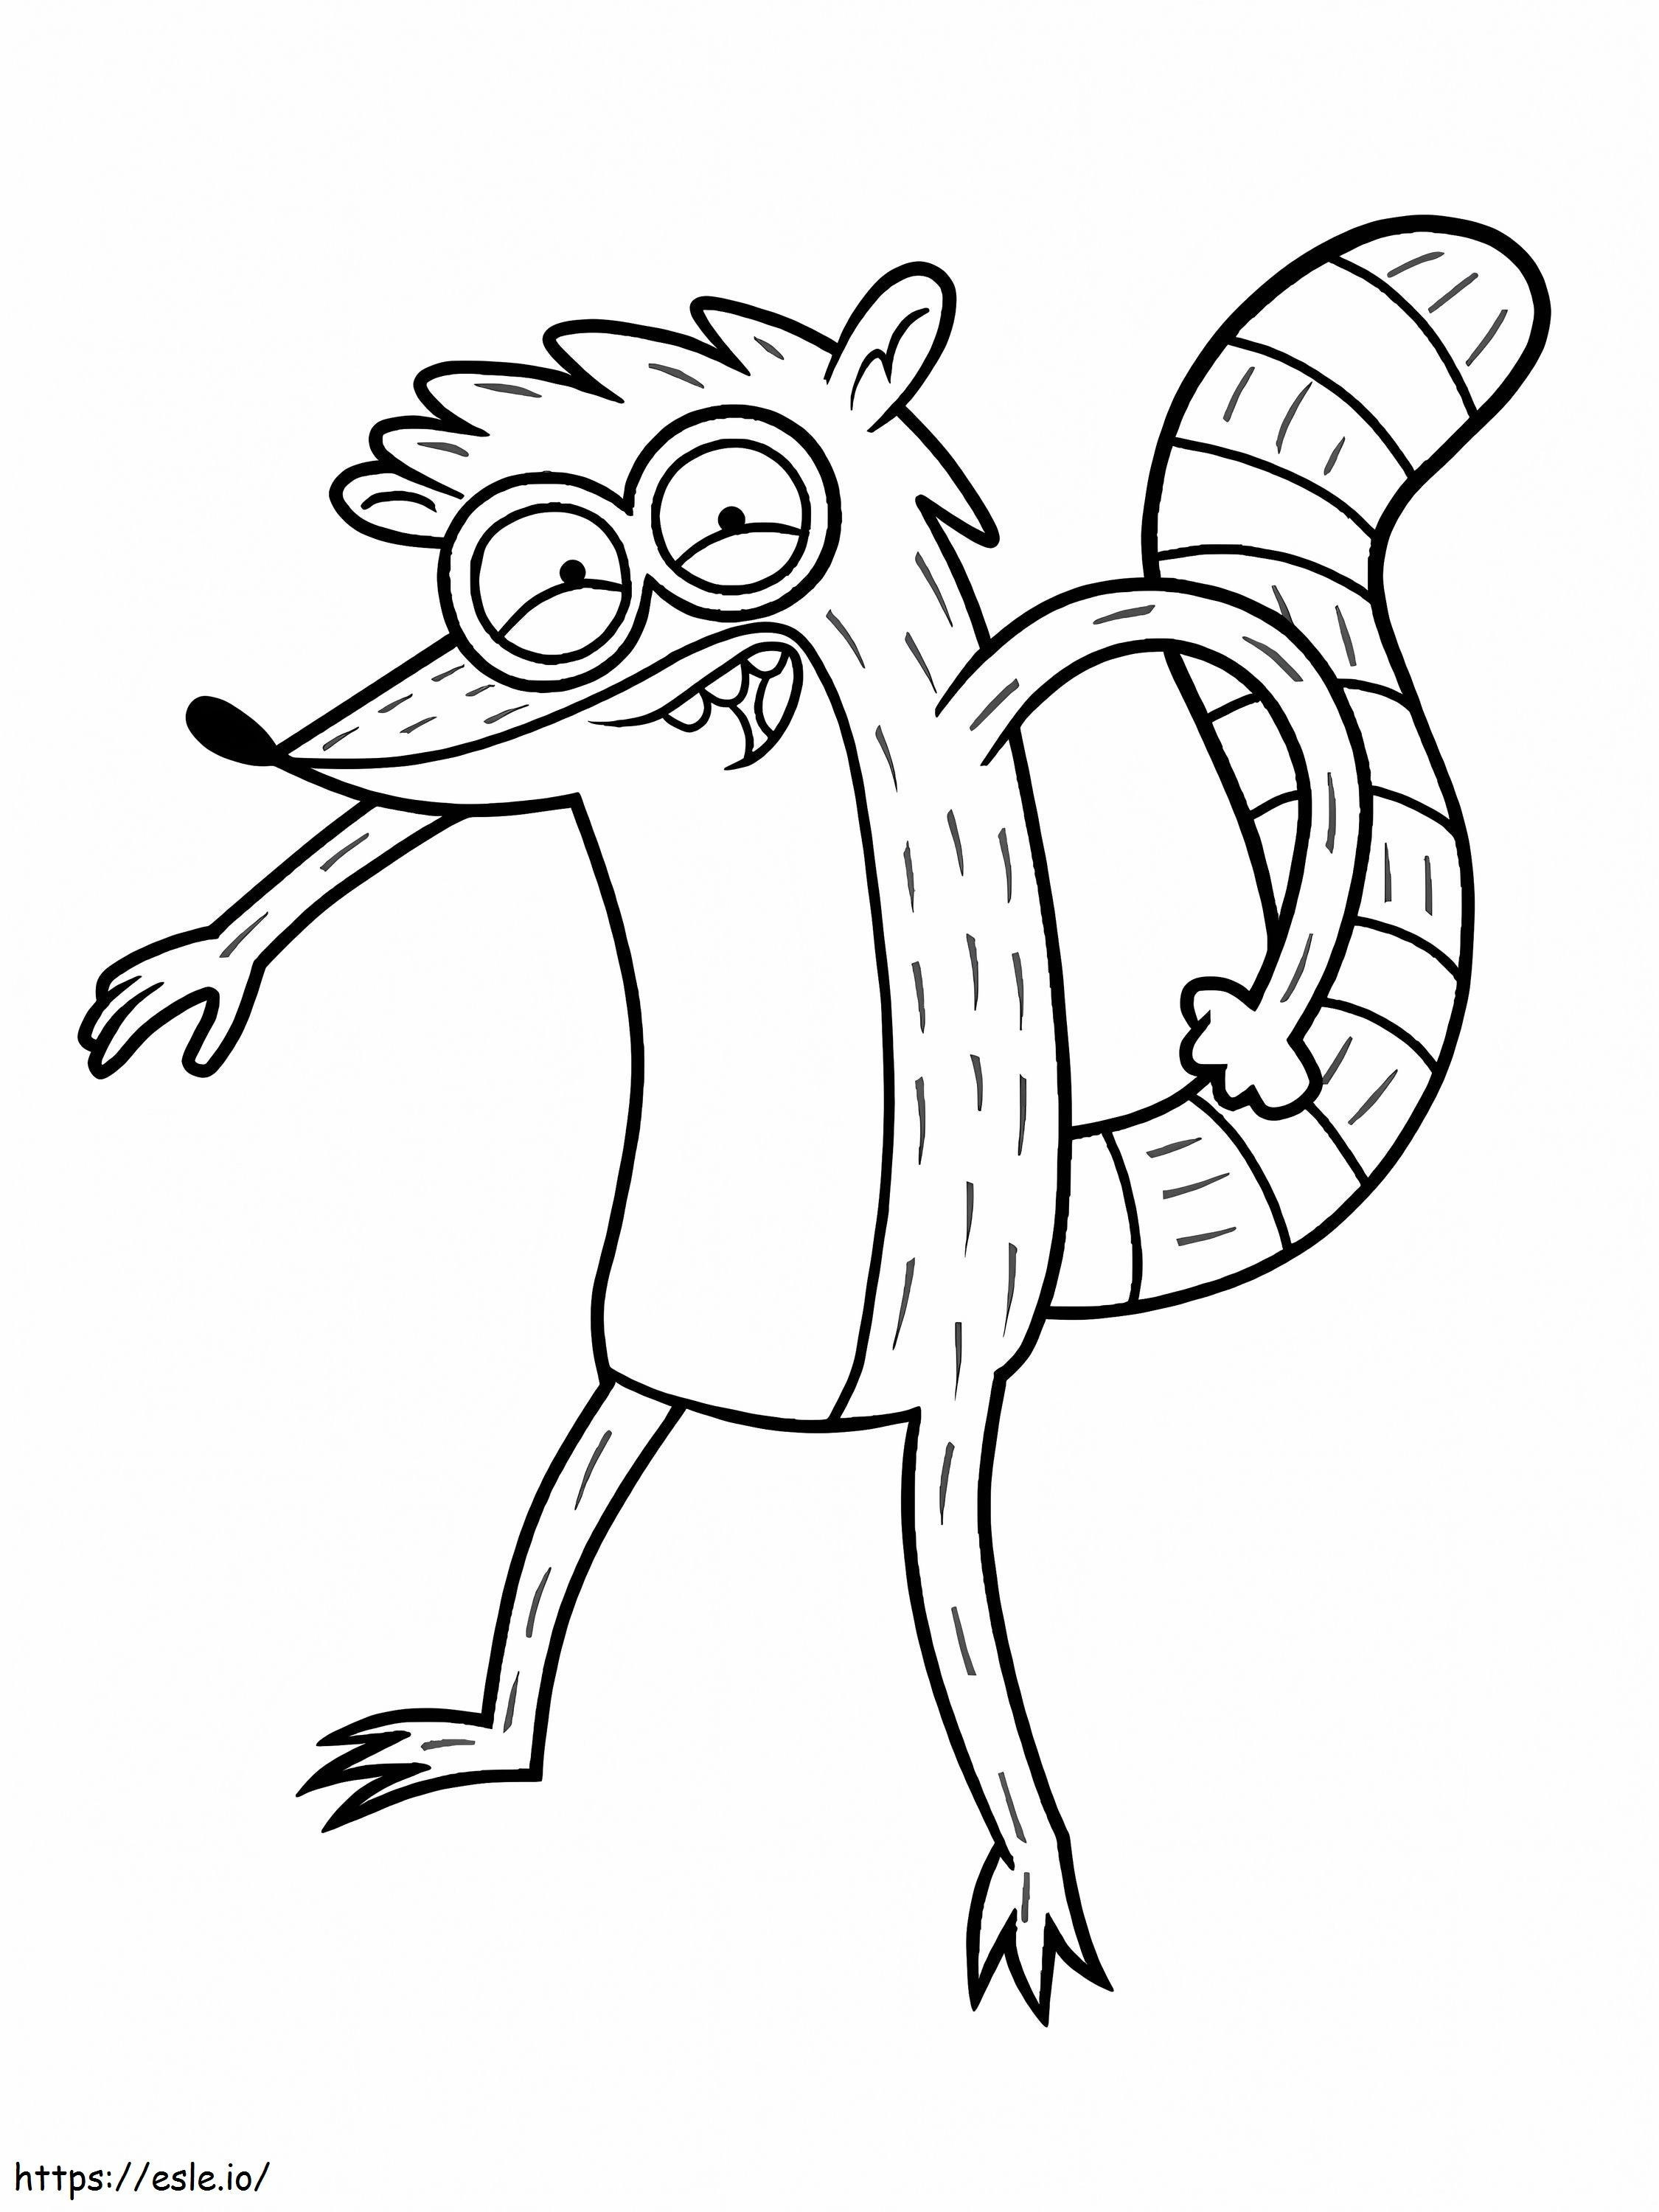 Rigby In Regular Show coloring page